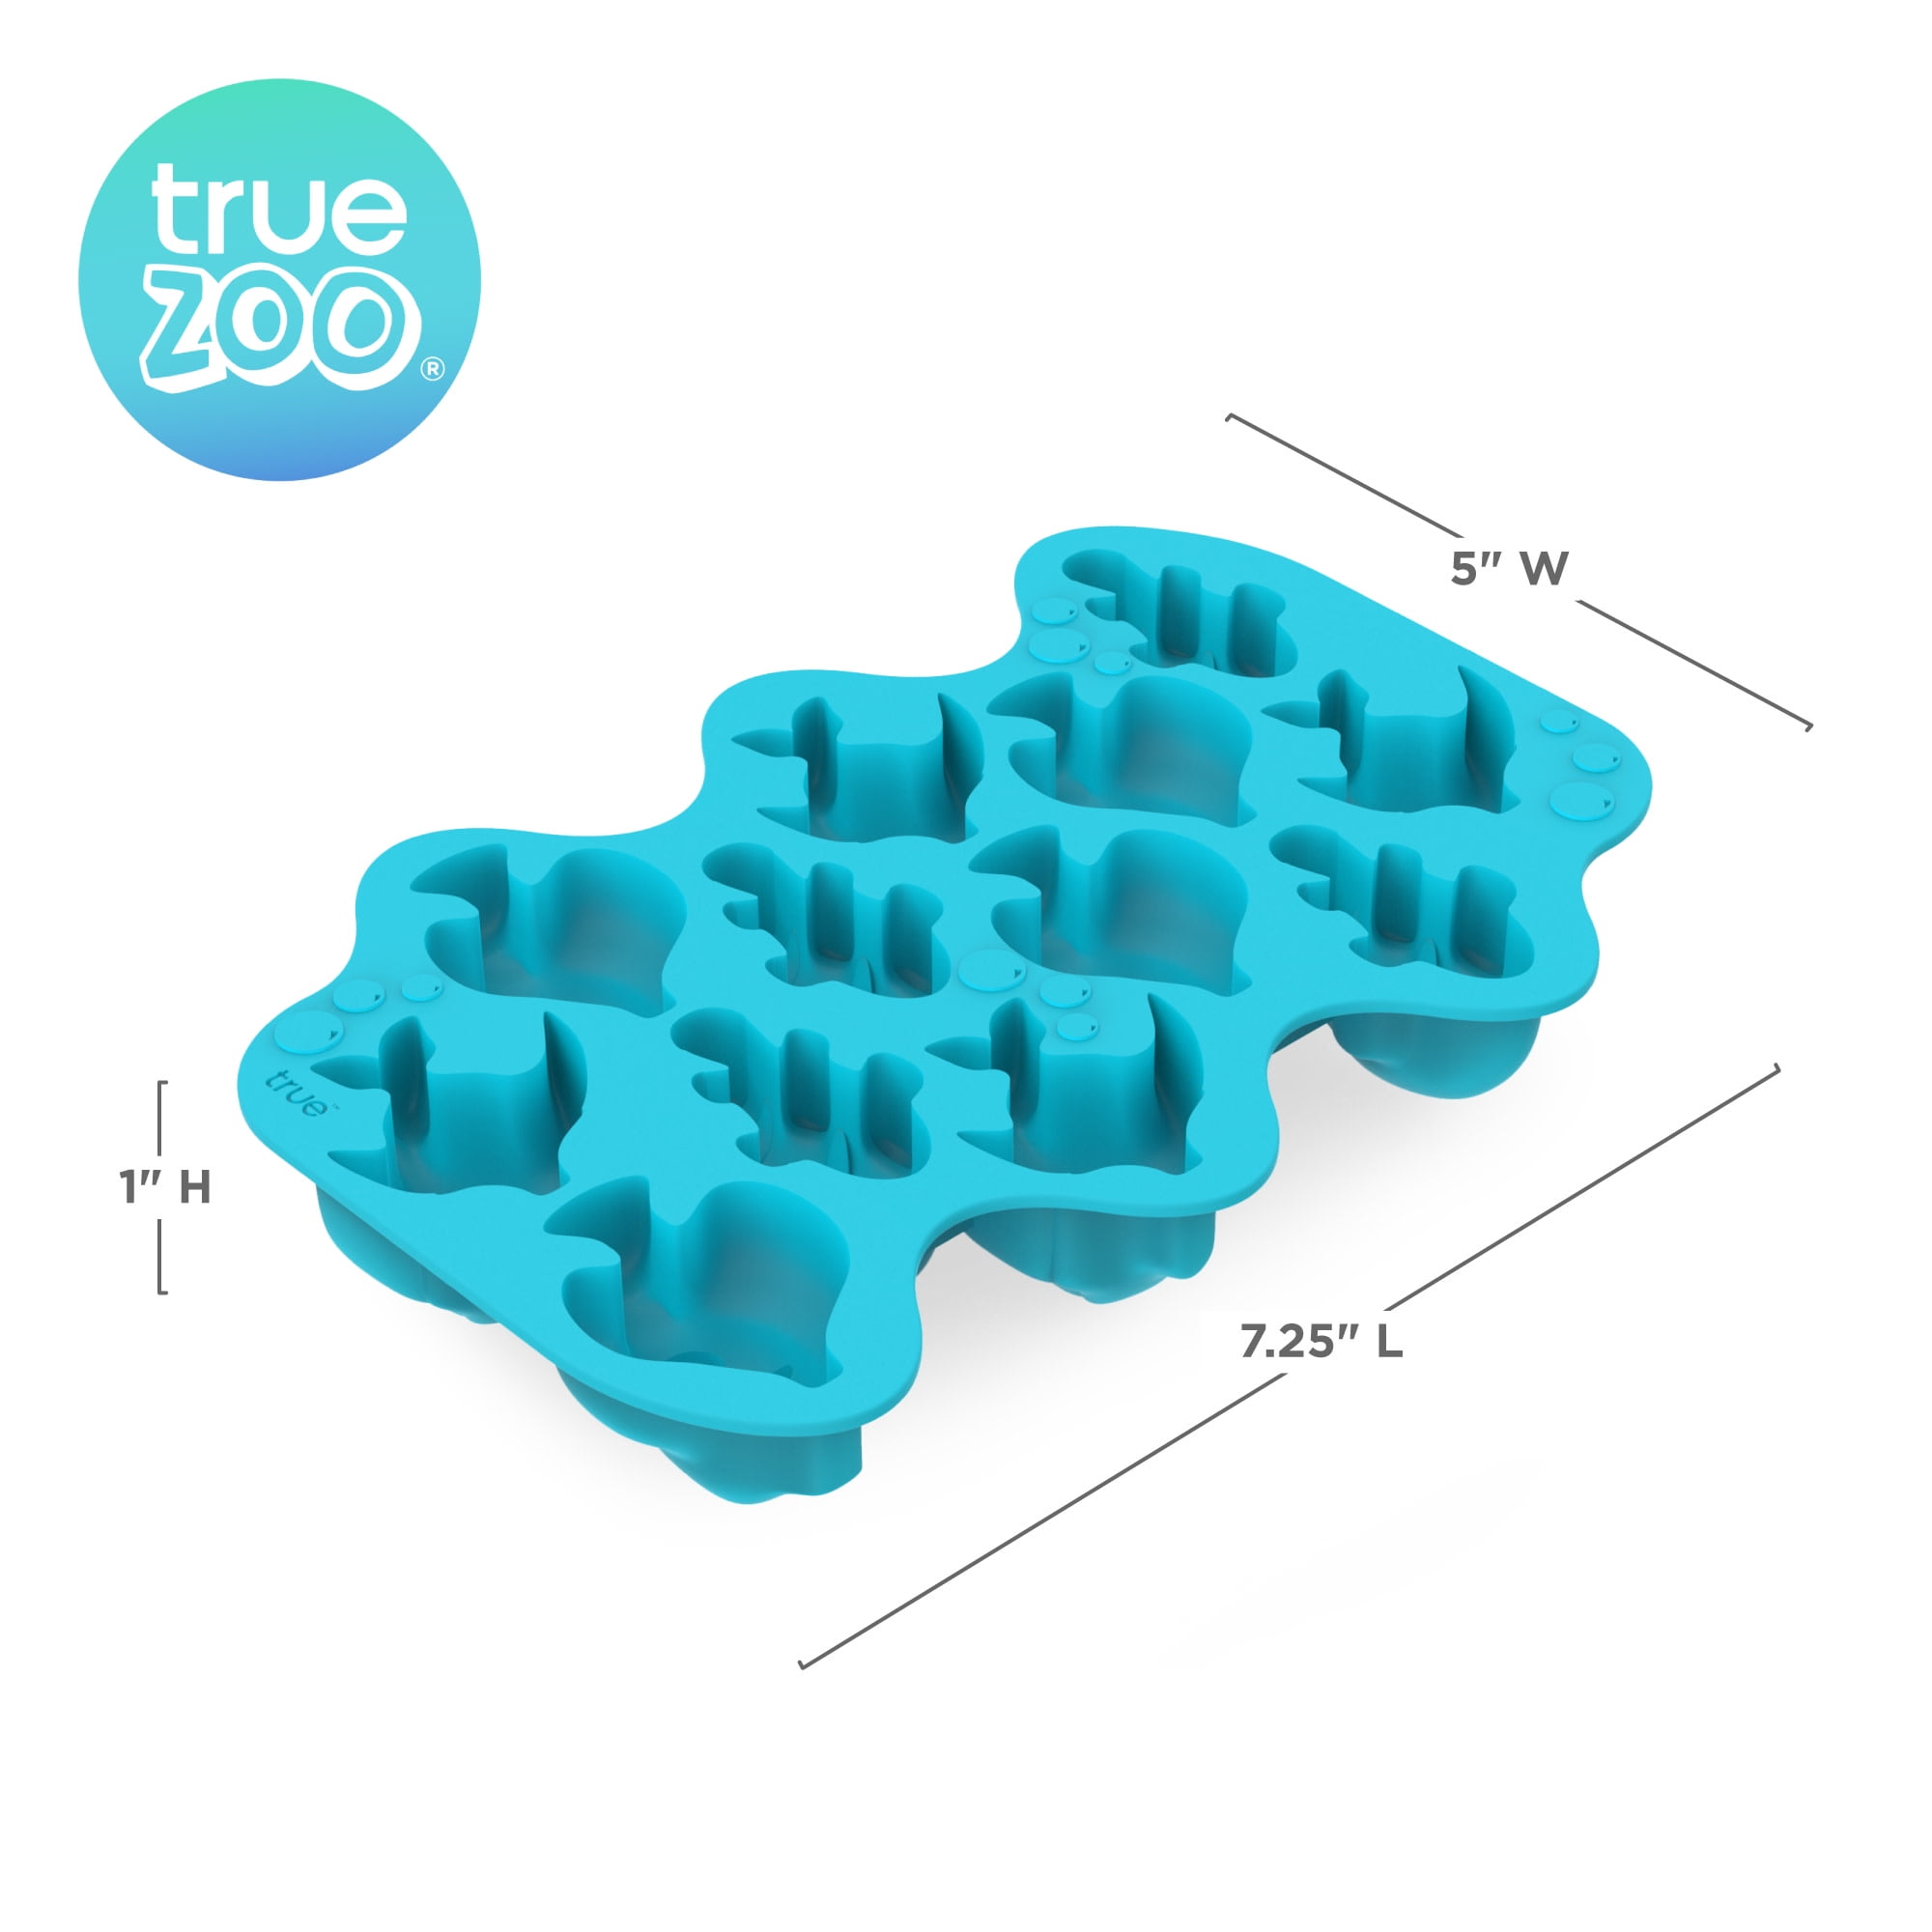 True Zoo U Ice of A, Silicone Ice Cube Tray, USA Ice Mold, Novelty Ice July  4th Party Supplies, Dishwasher Safe, Blue, 38 Cubes